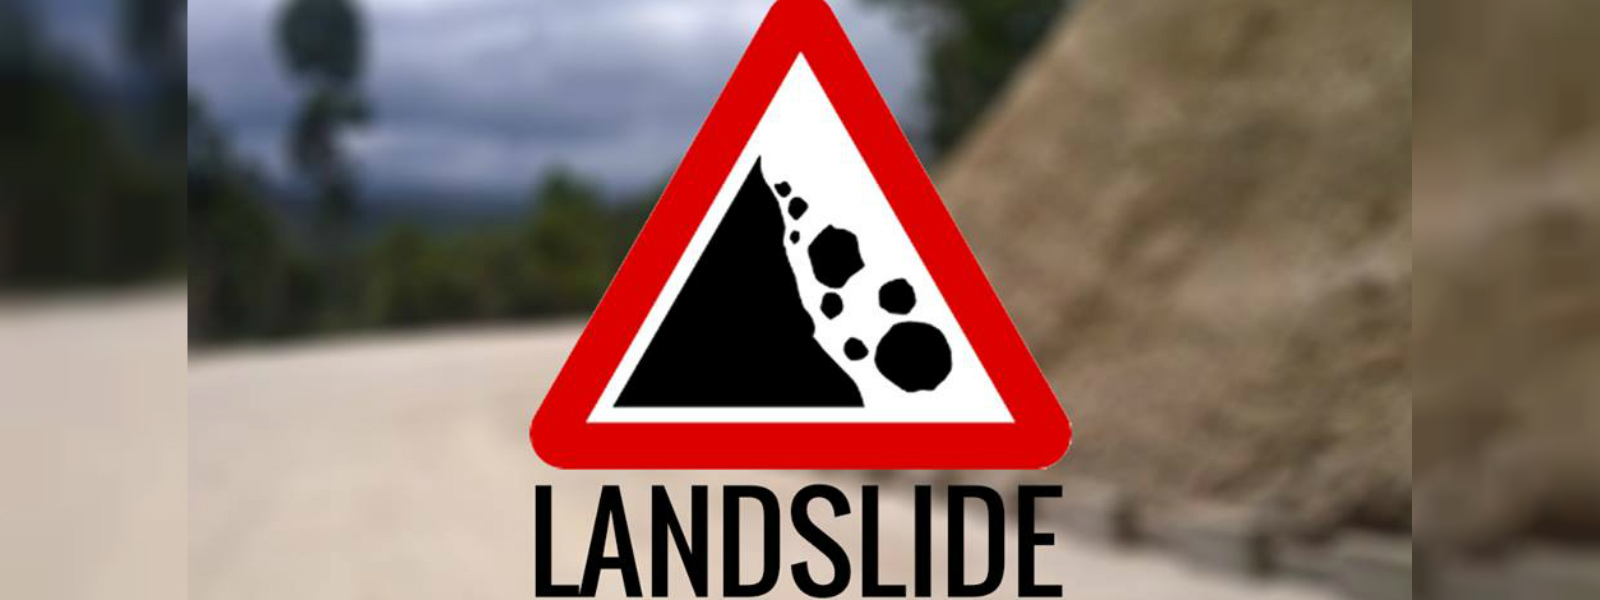 New landslide warnings issued by the NBRO